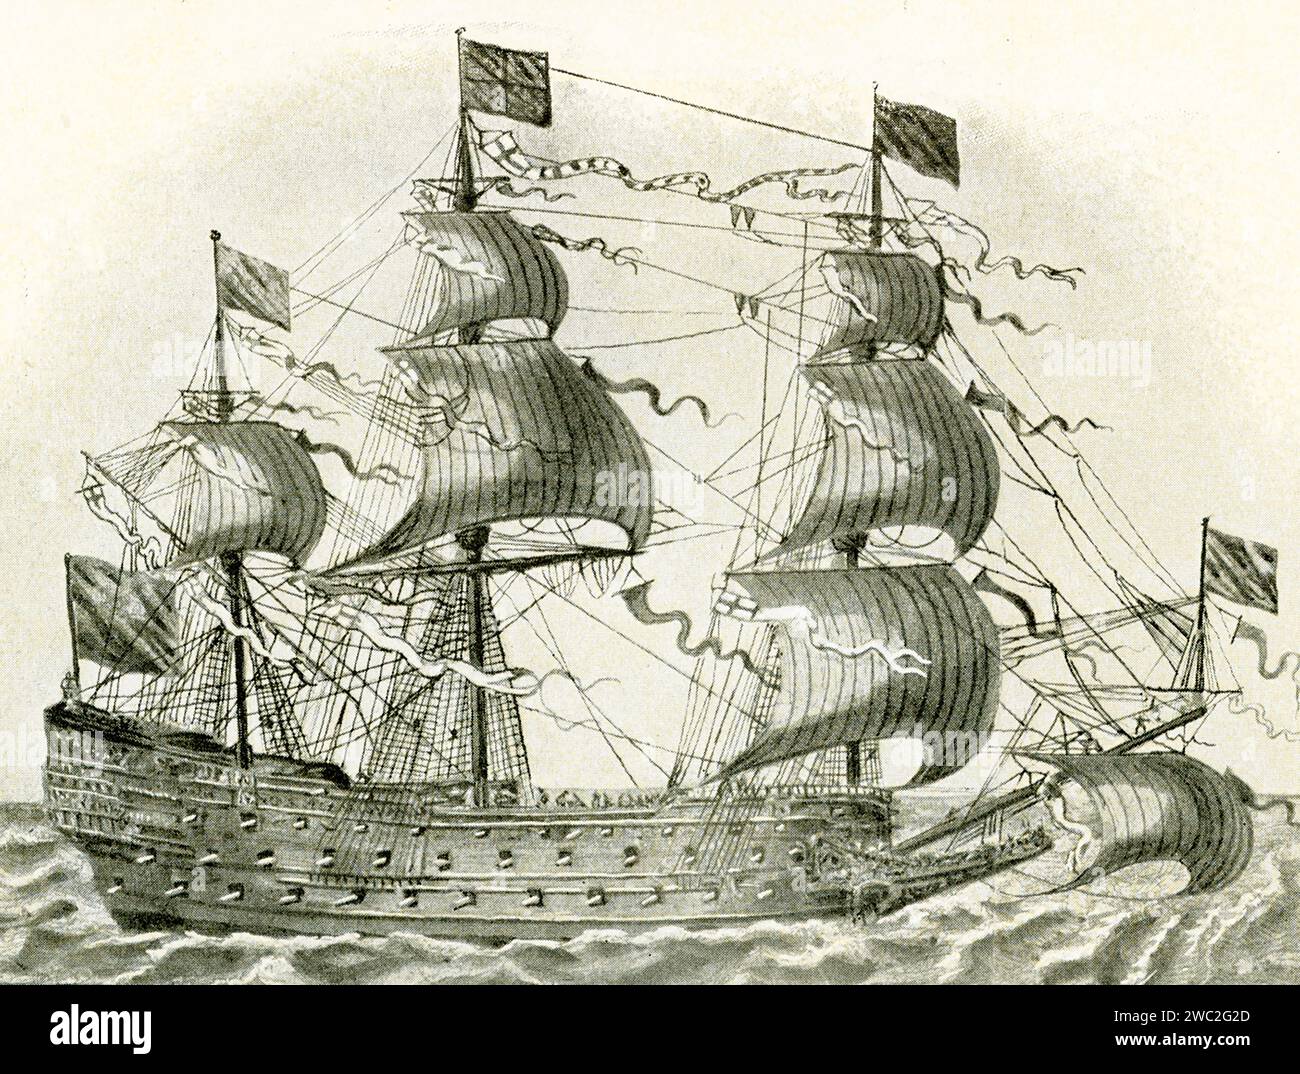 English ship of the line from the beginning of the 17th century—The Great Charles. The vessel was an 80-gun first-rate three-decker ship of the line of the English navy. Stock Photo